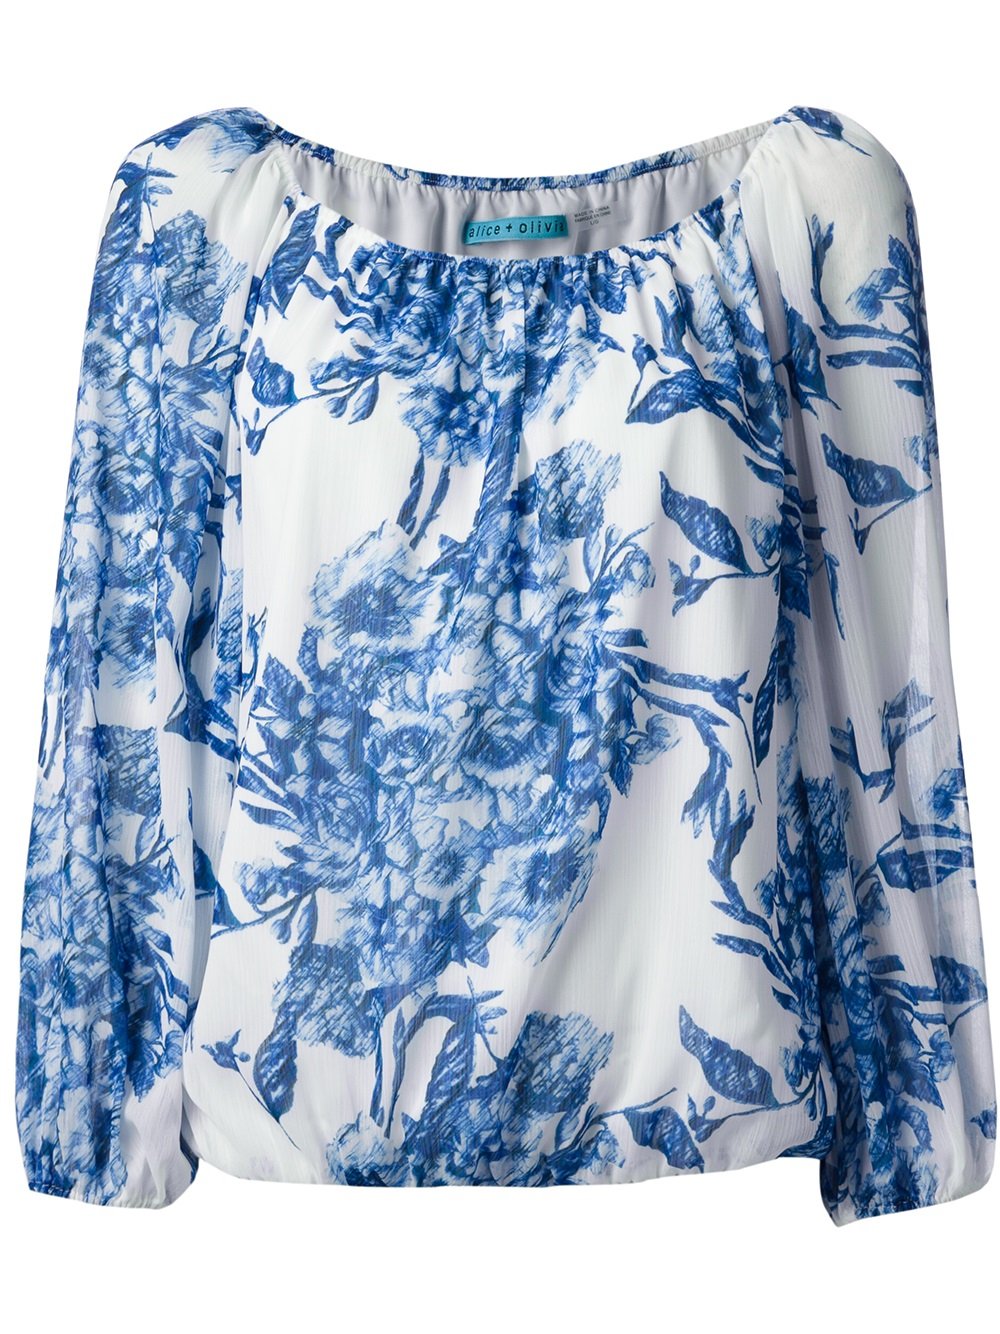 Lyst - Alice + olivia Floral Print Blouse in Blue